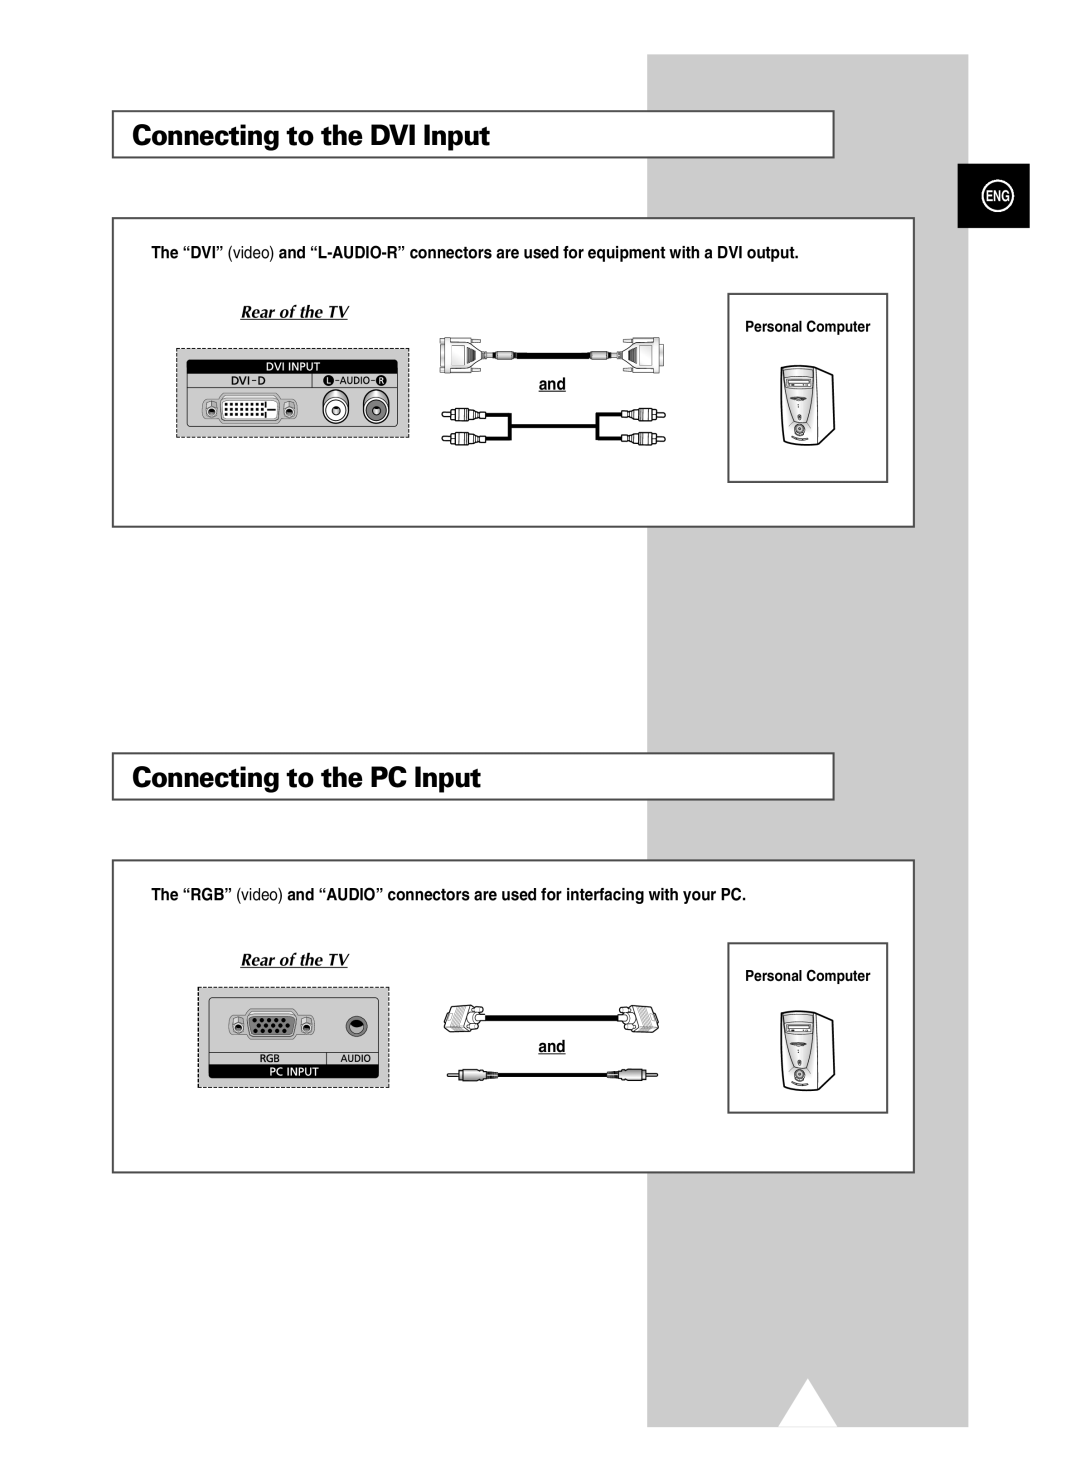 Samsung PS-37S4A1 manual Connecting to the DVI Input, Connecting to the PC Input, Rear of the TV, Personal Computer 